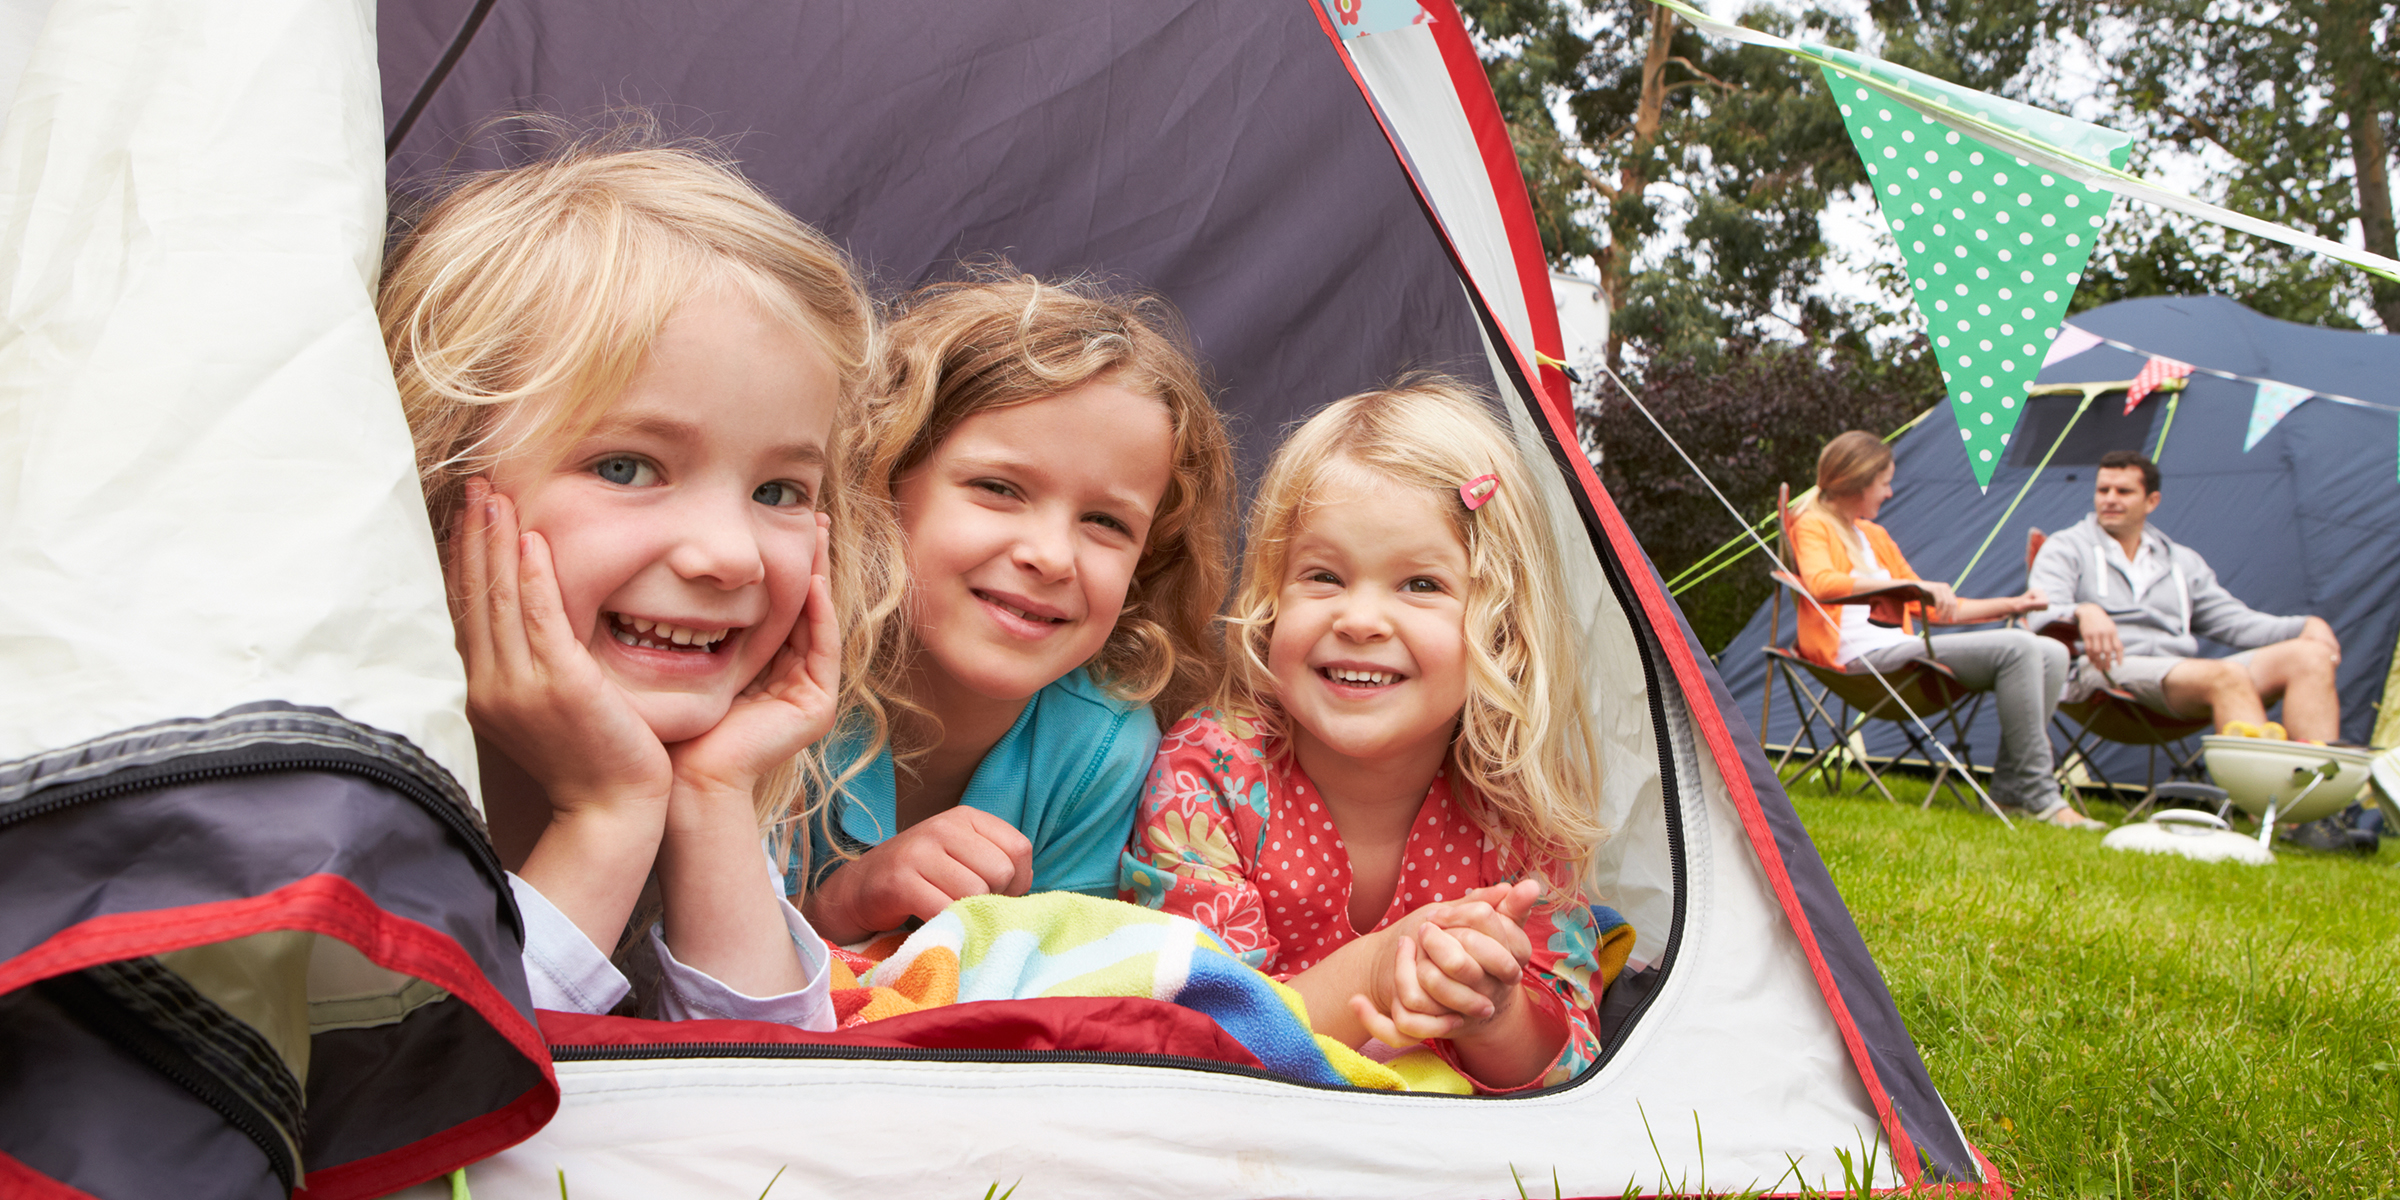 Children at a camp with their parents | Source: Shutterstock